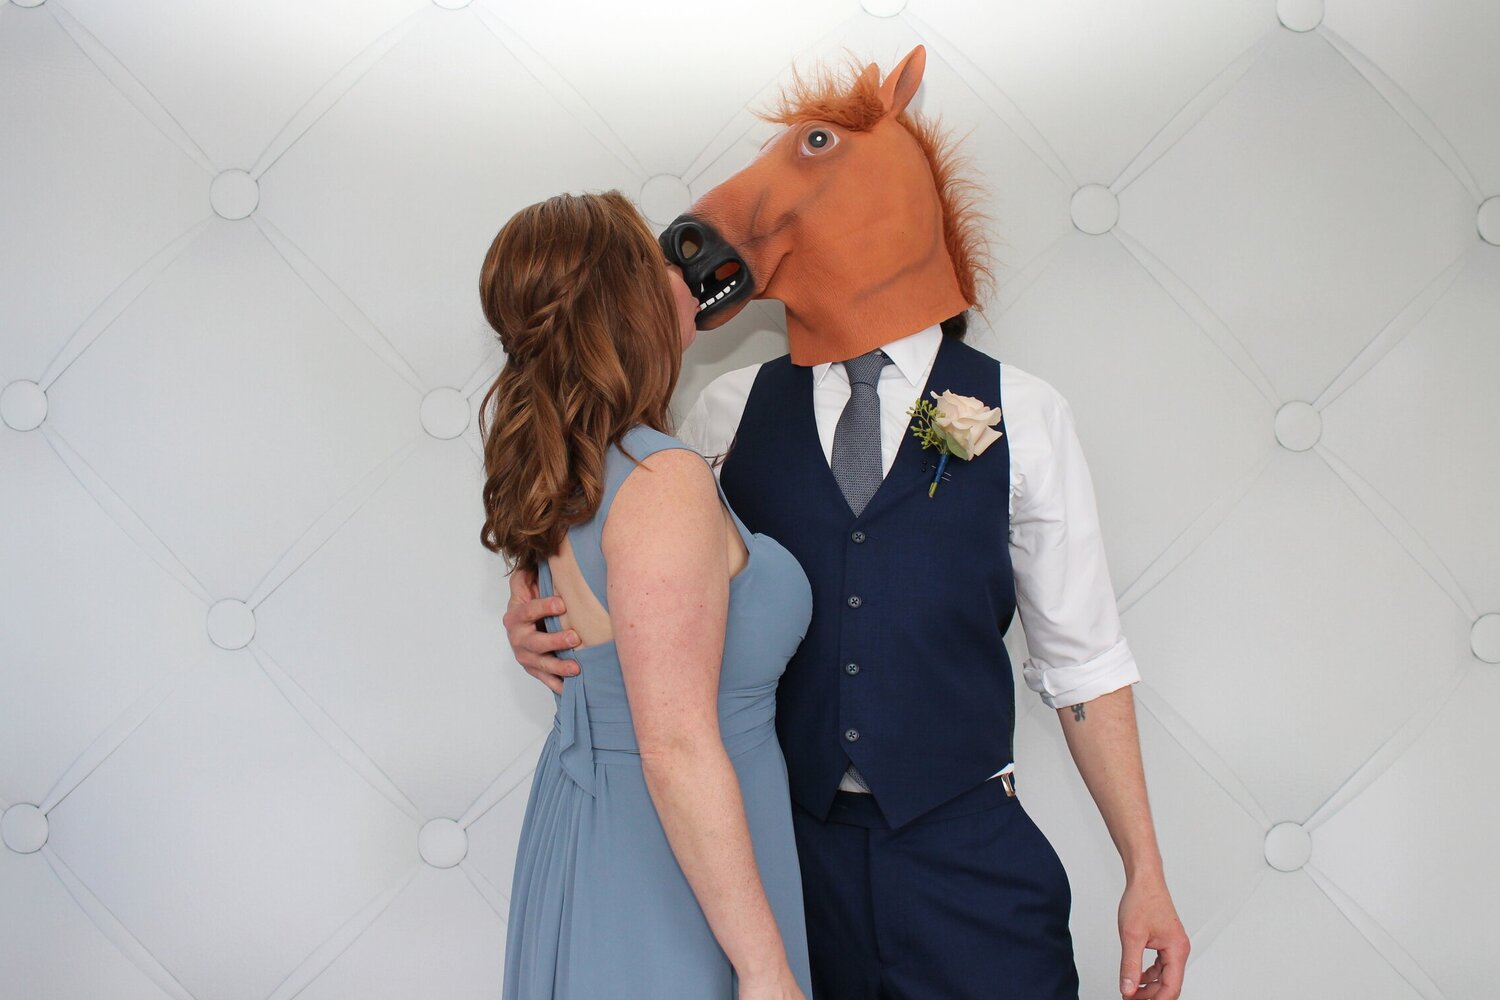 funny photo booth props horse mask